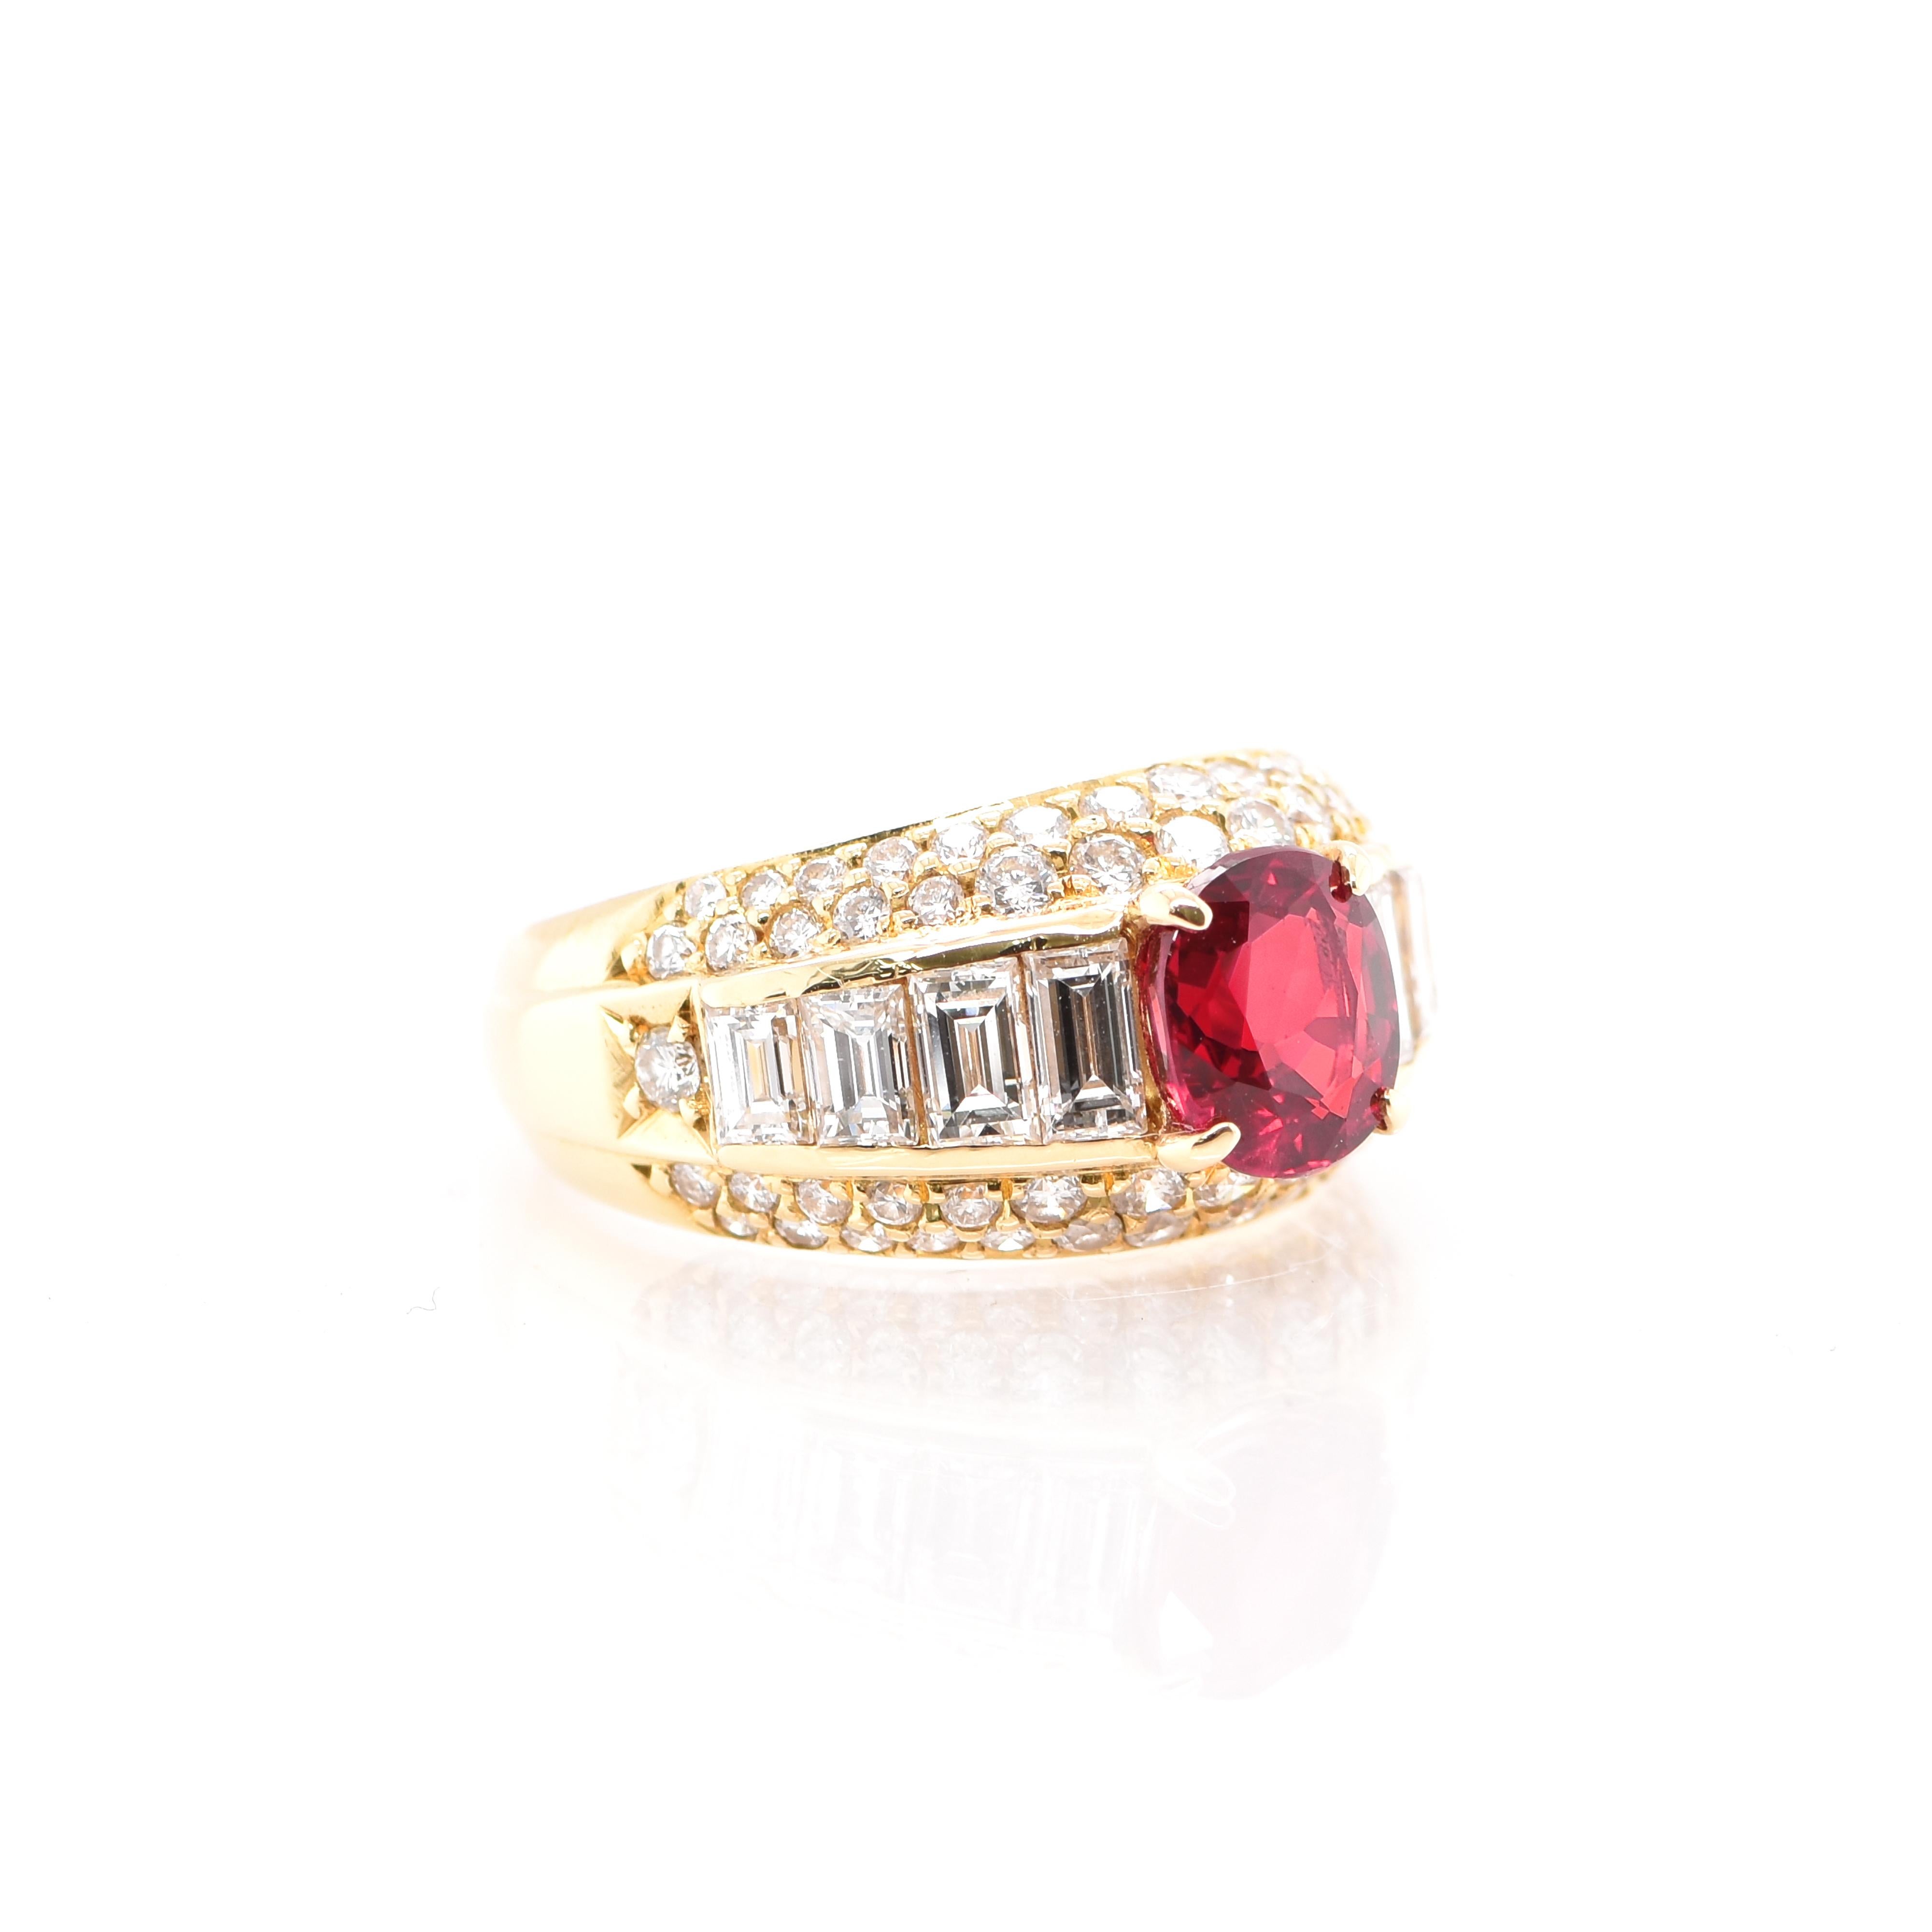 Oval Cut 1.48 Carat Ruby and Diamond Band Ring Set in 18 Karat Gold